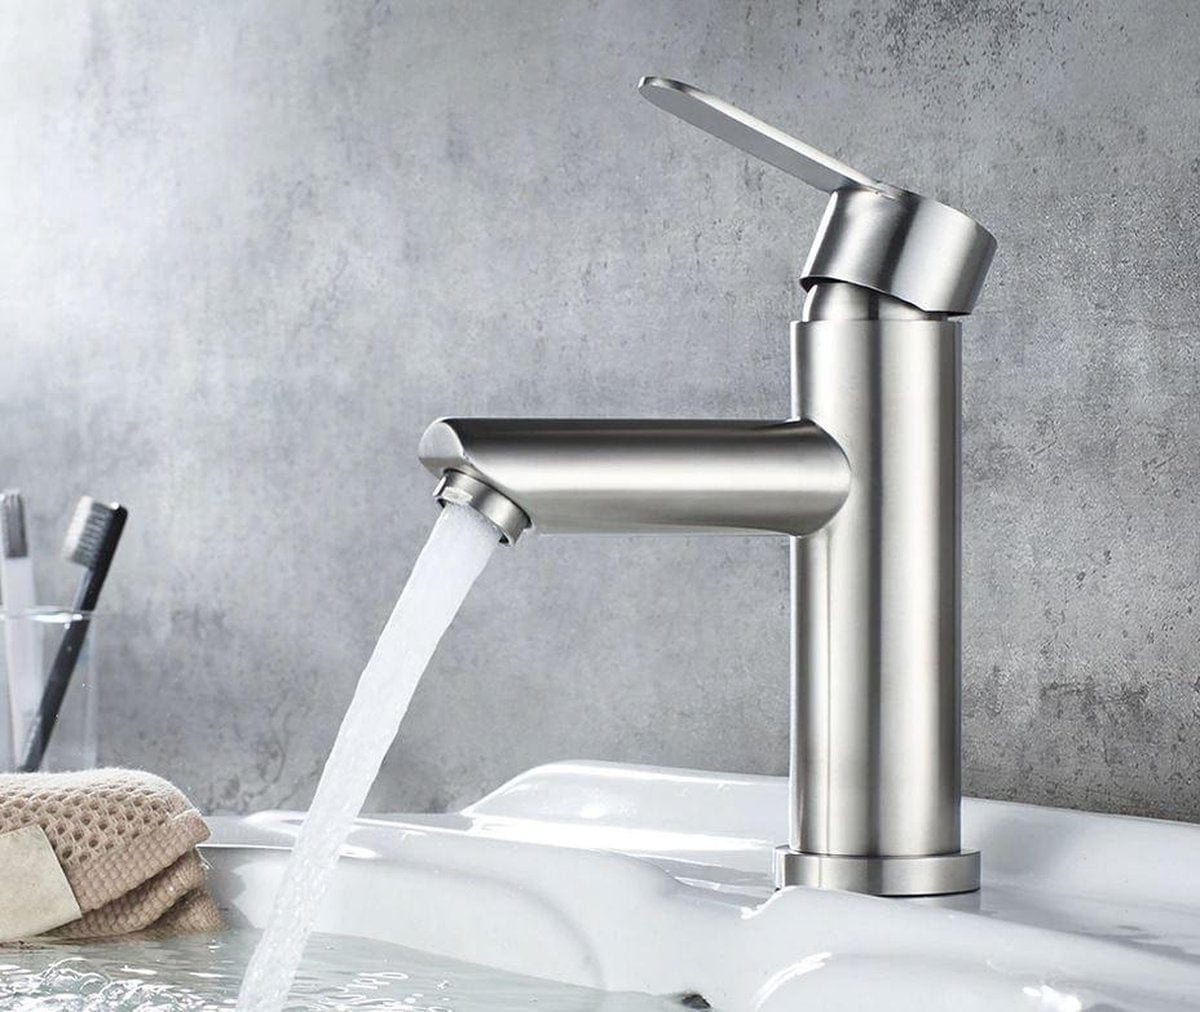 Buy MaxTen Bathroom Stainless Steel Hot & Cold Basin Faucet Mixer - S20-142 & S20-142BL | Shop at Supply Master Accra, Ghana Bathroom Faucet Satin Nickel Buy Tools hardware Building materials